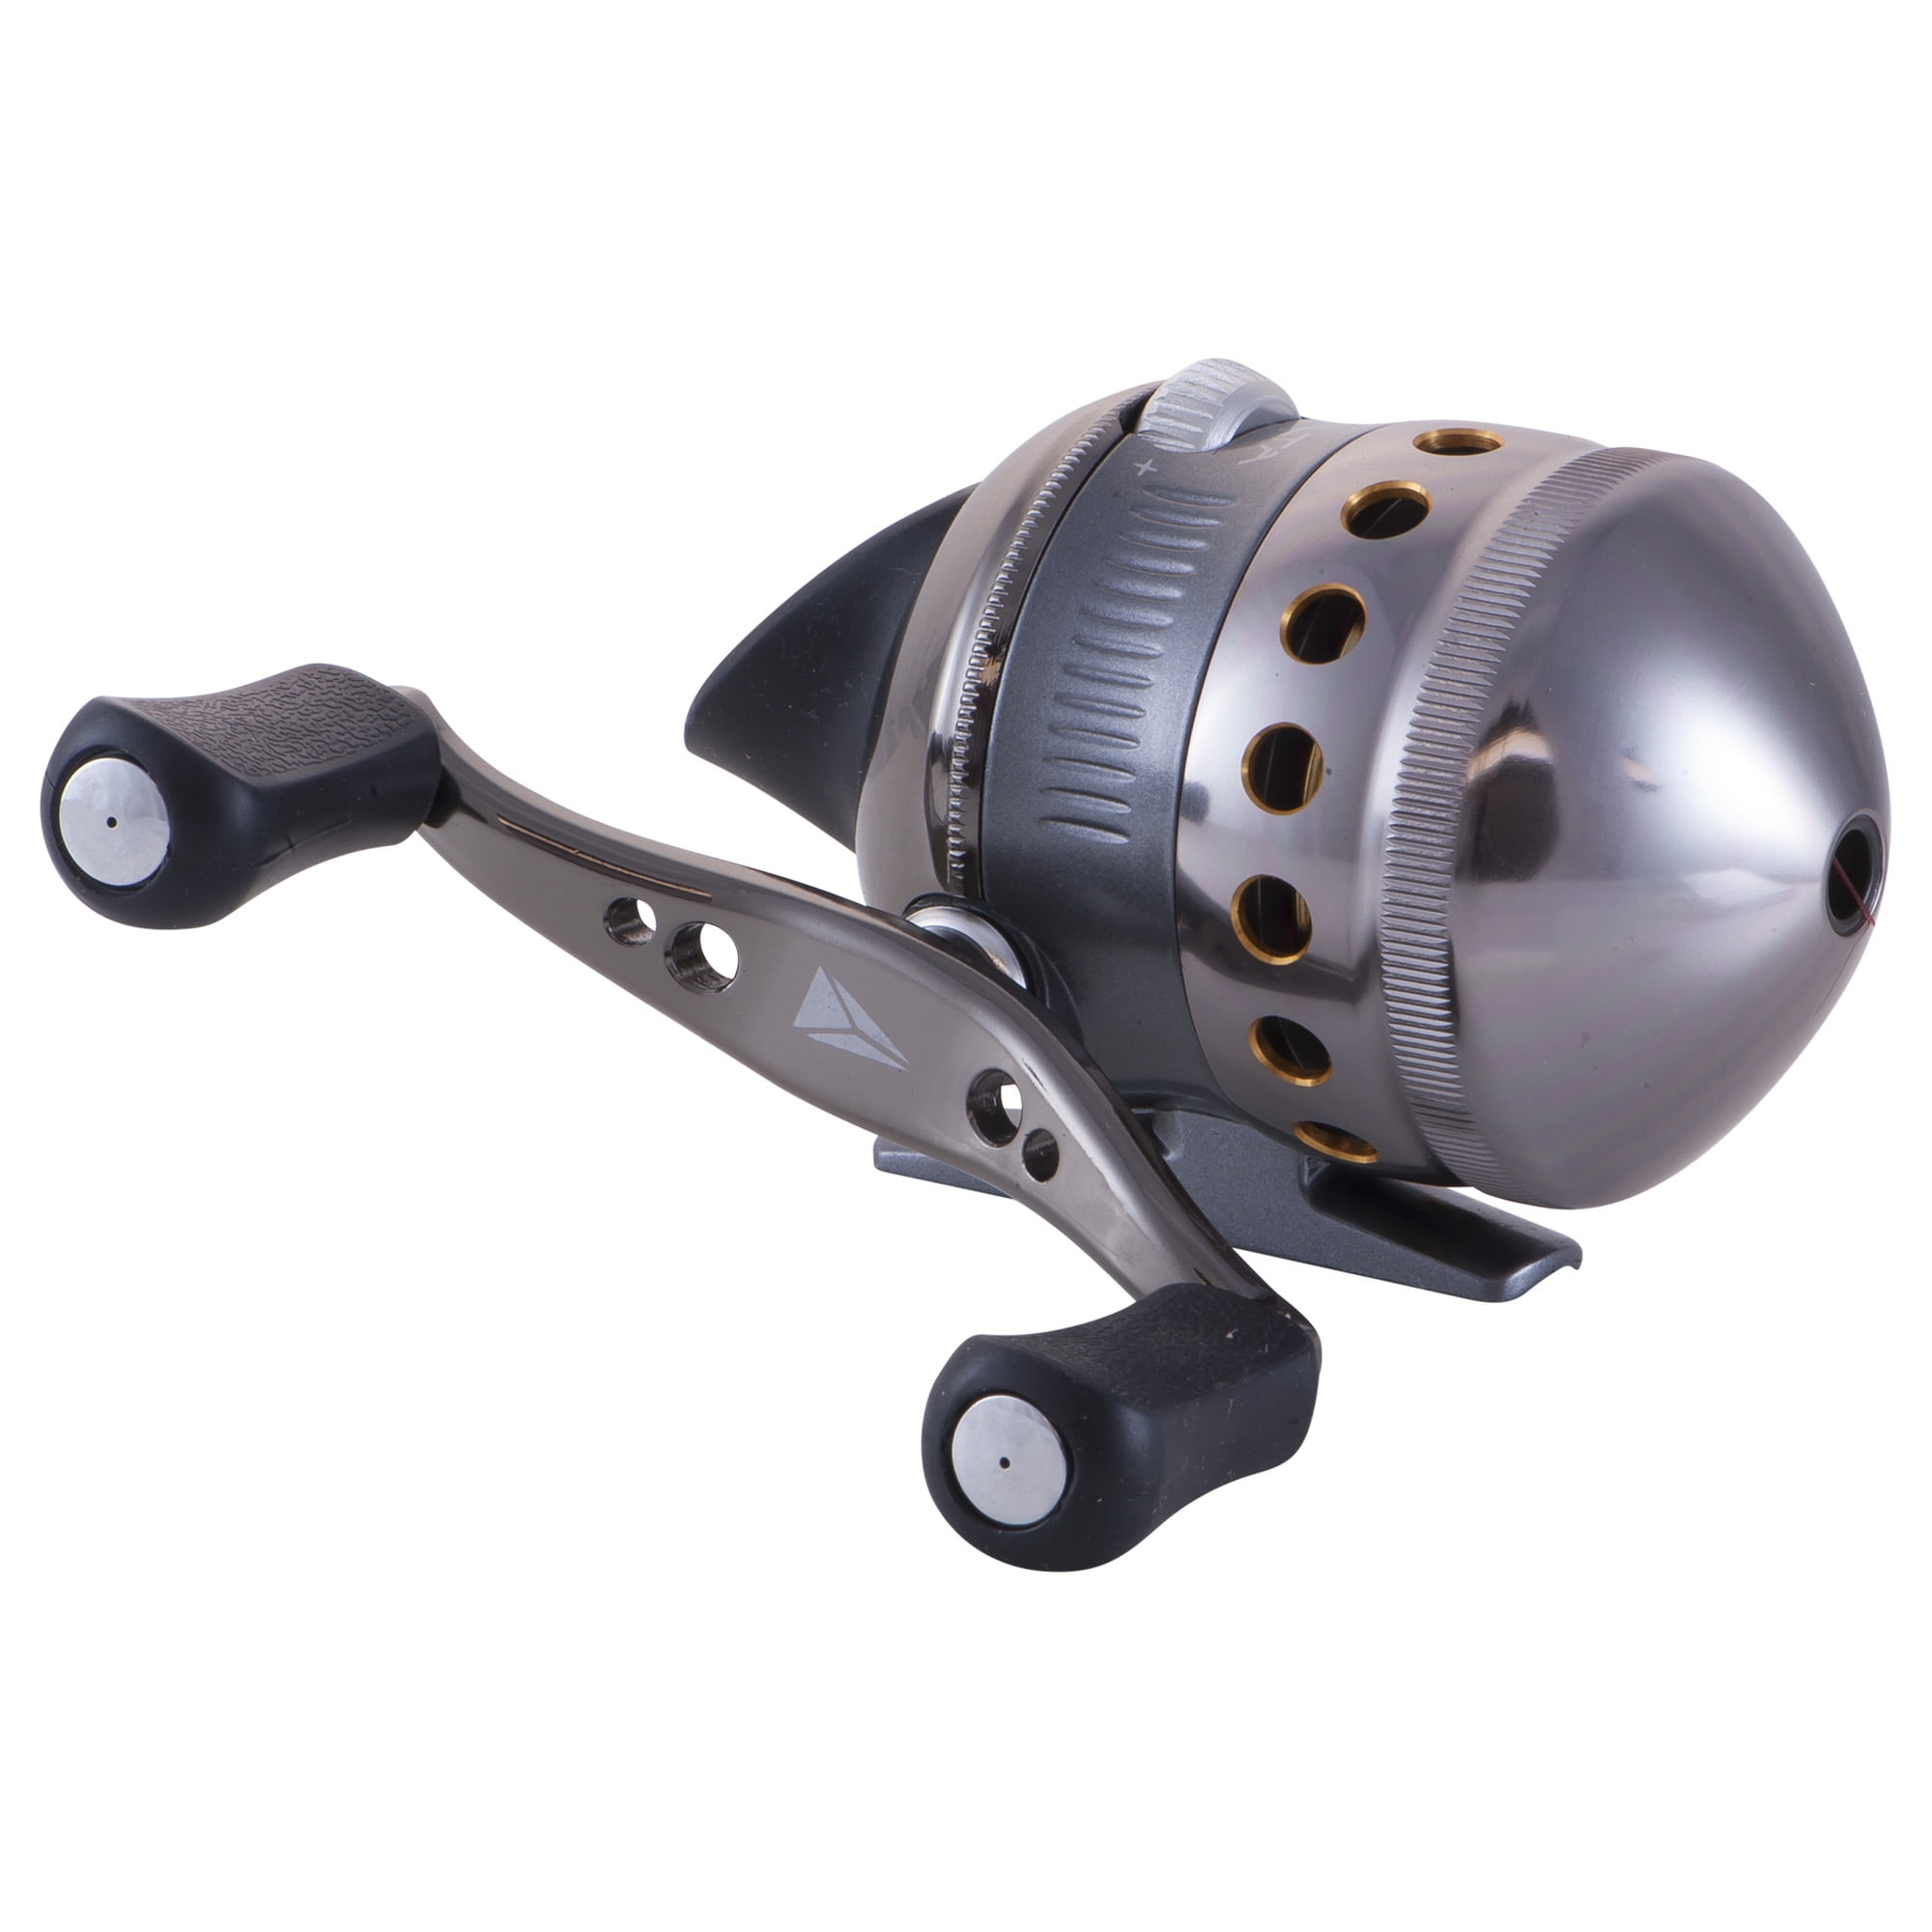 Reel, Cover, Front Retrieve, Anodized Fishing Left-Hand Size Fishing Zebco Delta Silver Reel, Spincast Right- Changeable Aluminum or and Pre-Spooled Zebco Double 10-Pound with Line, 30